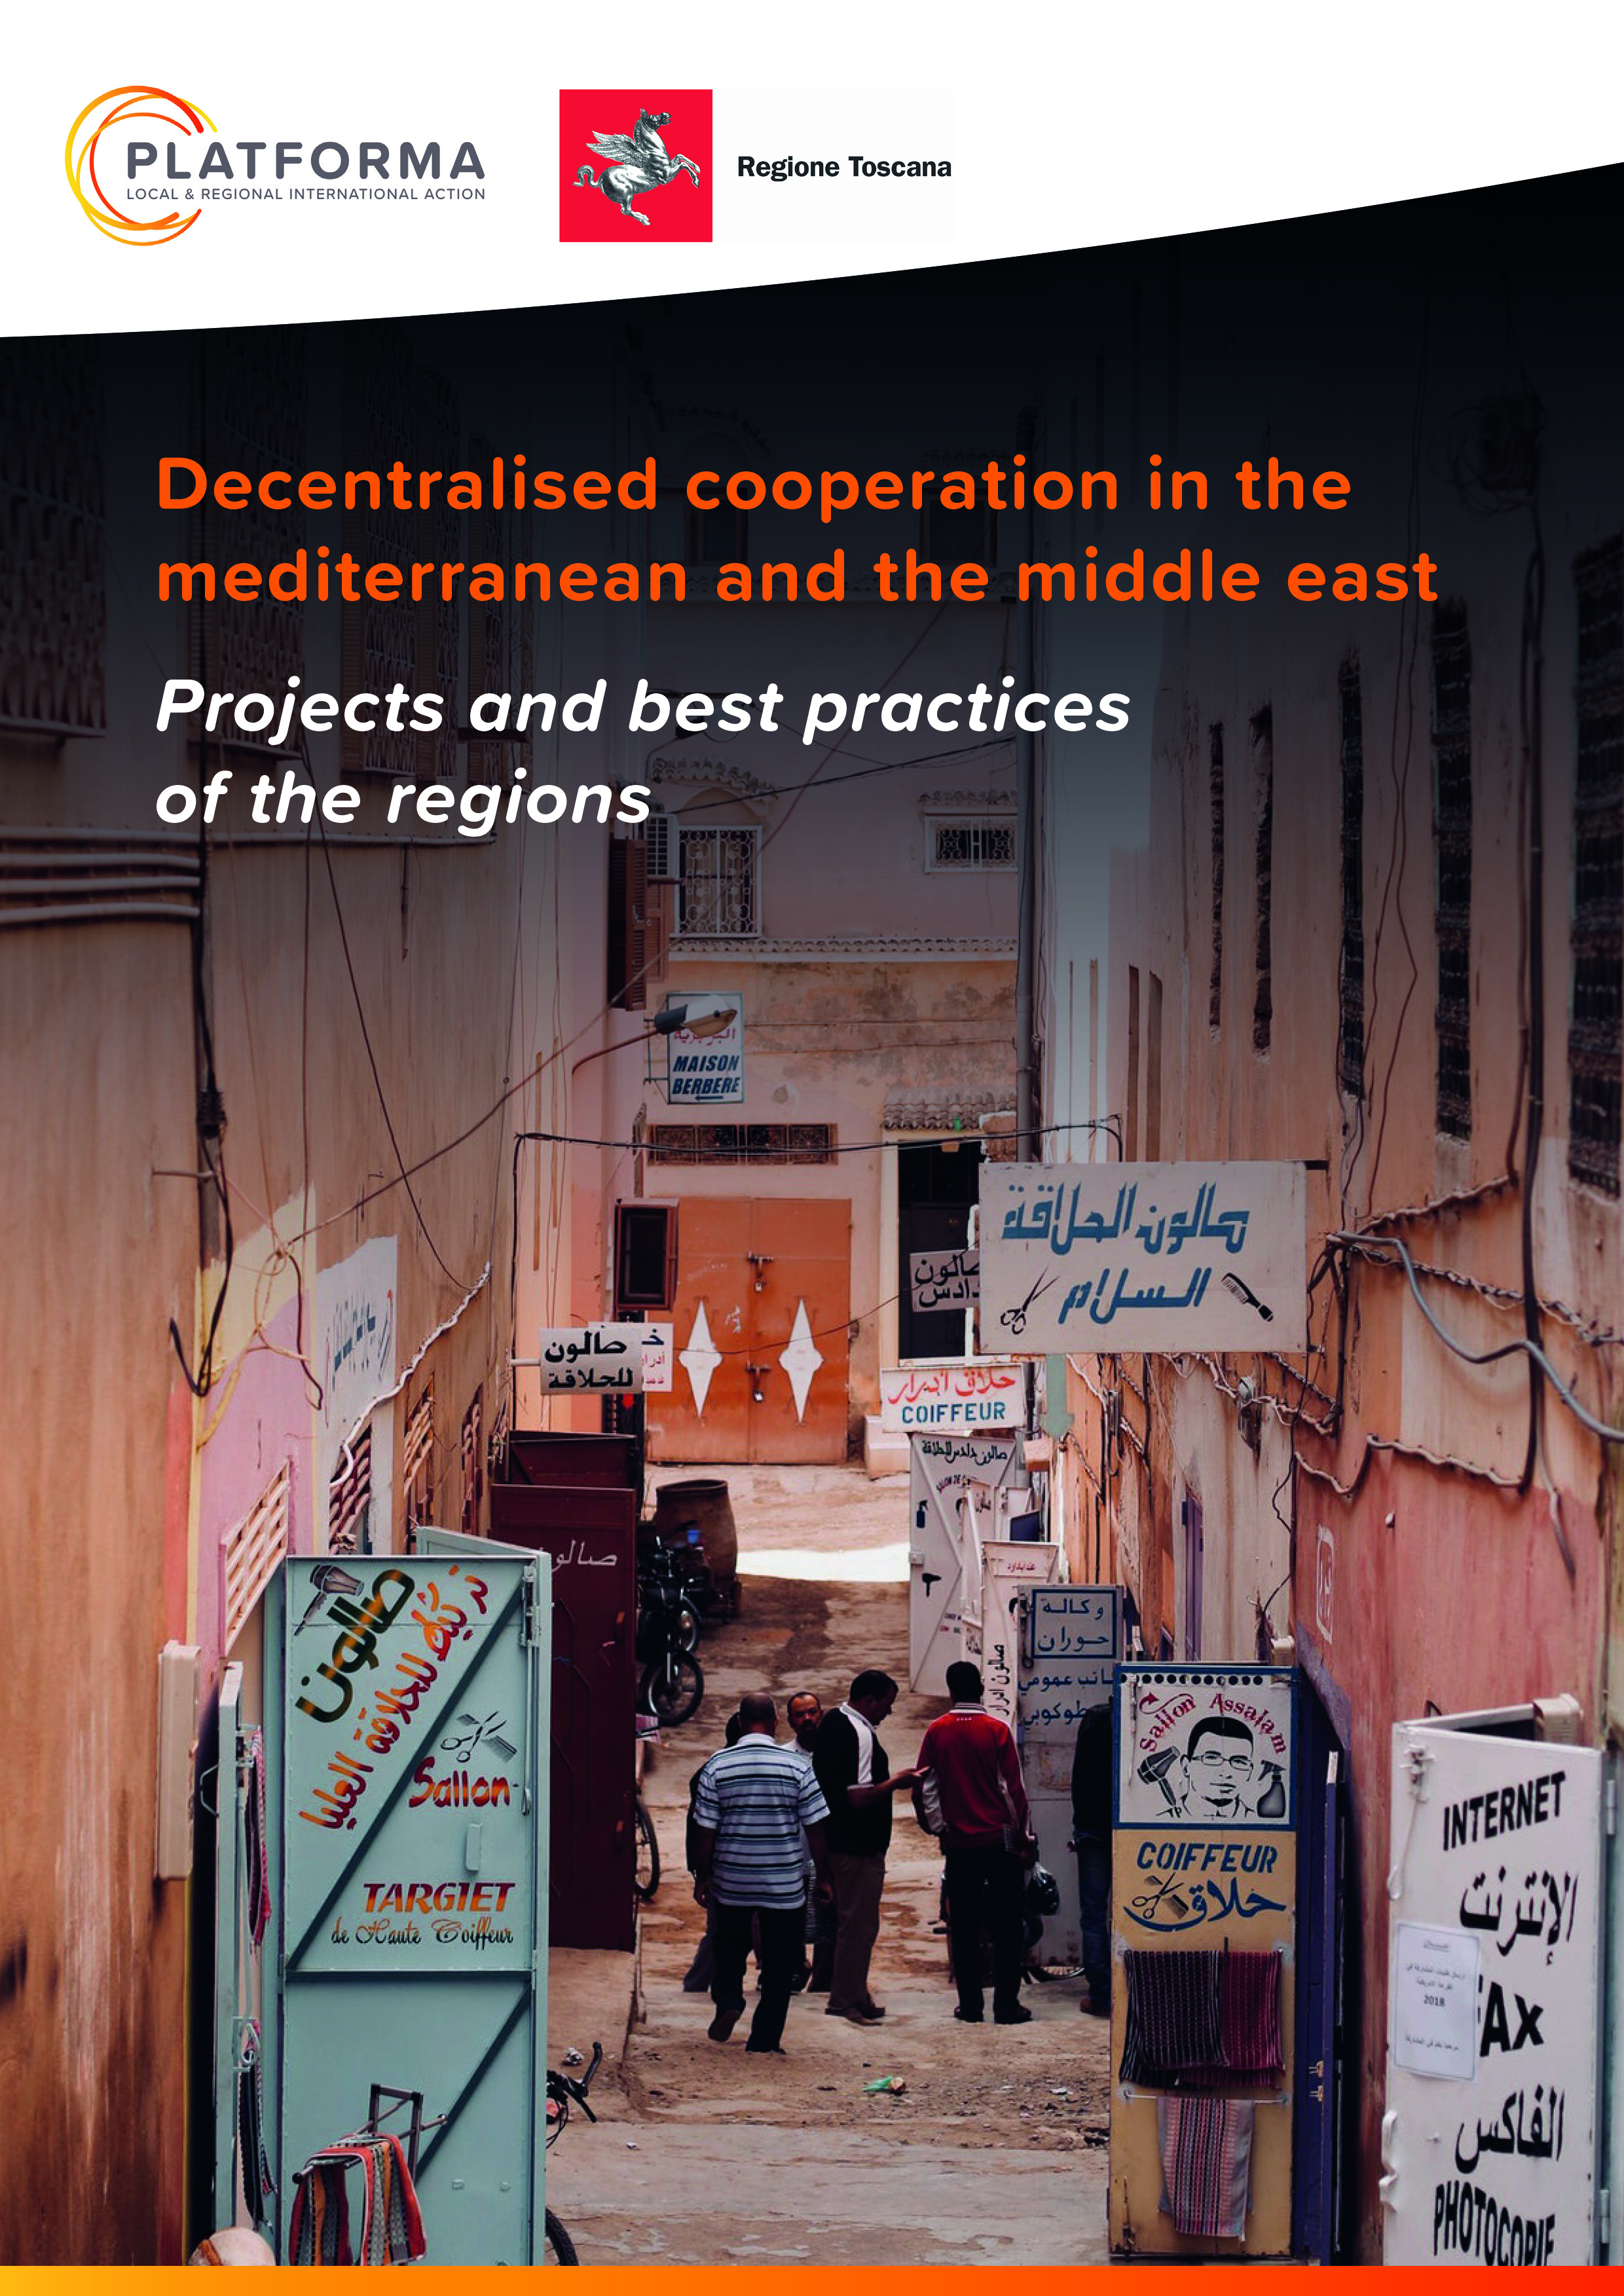 Decentralised cooperation in the Mediterranean and the Middle East